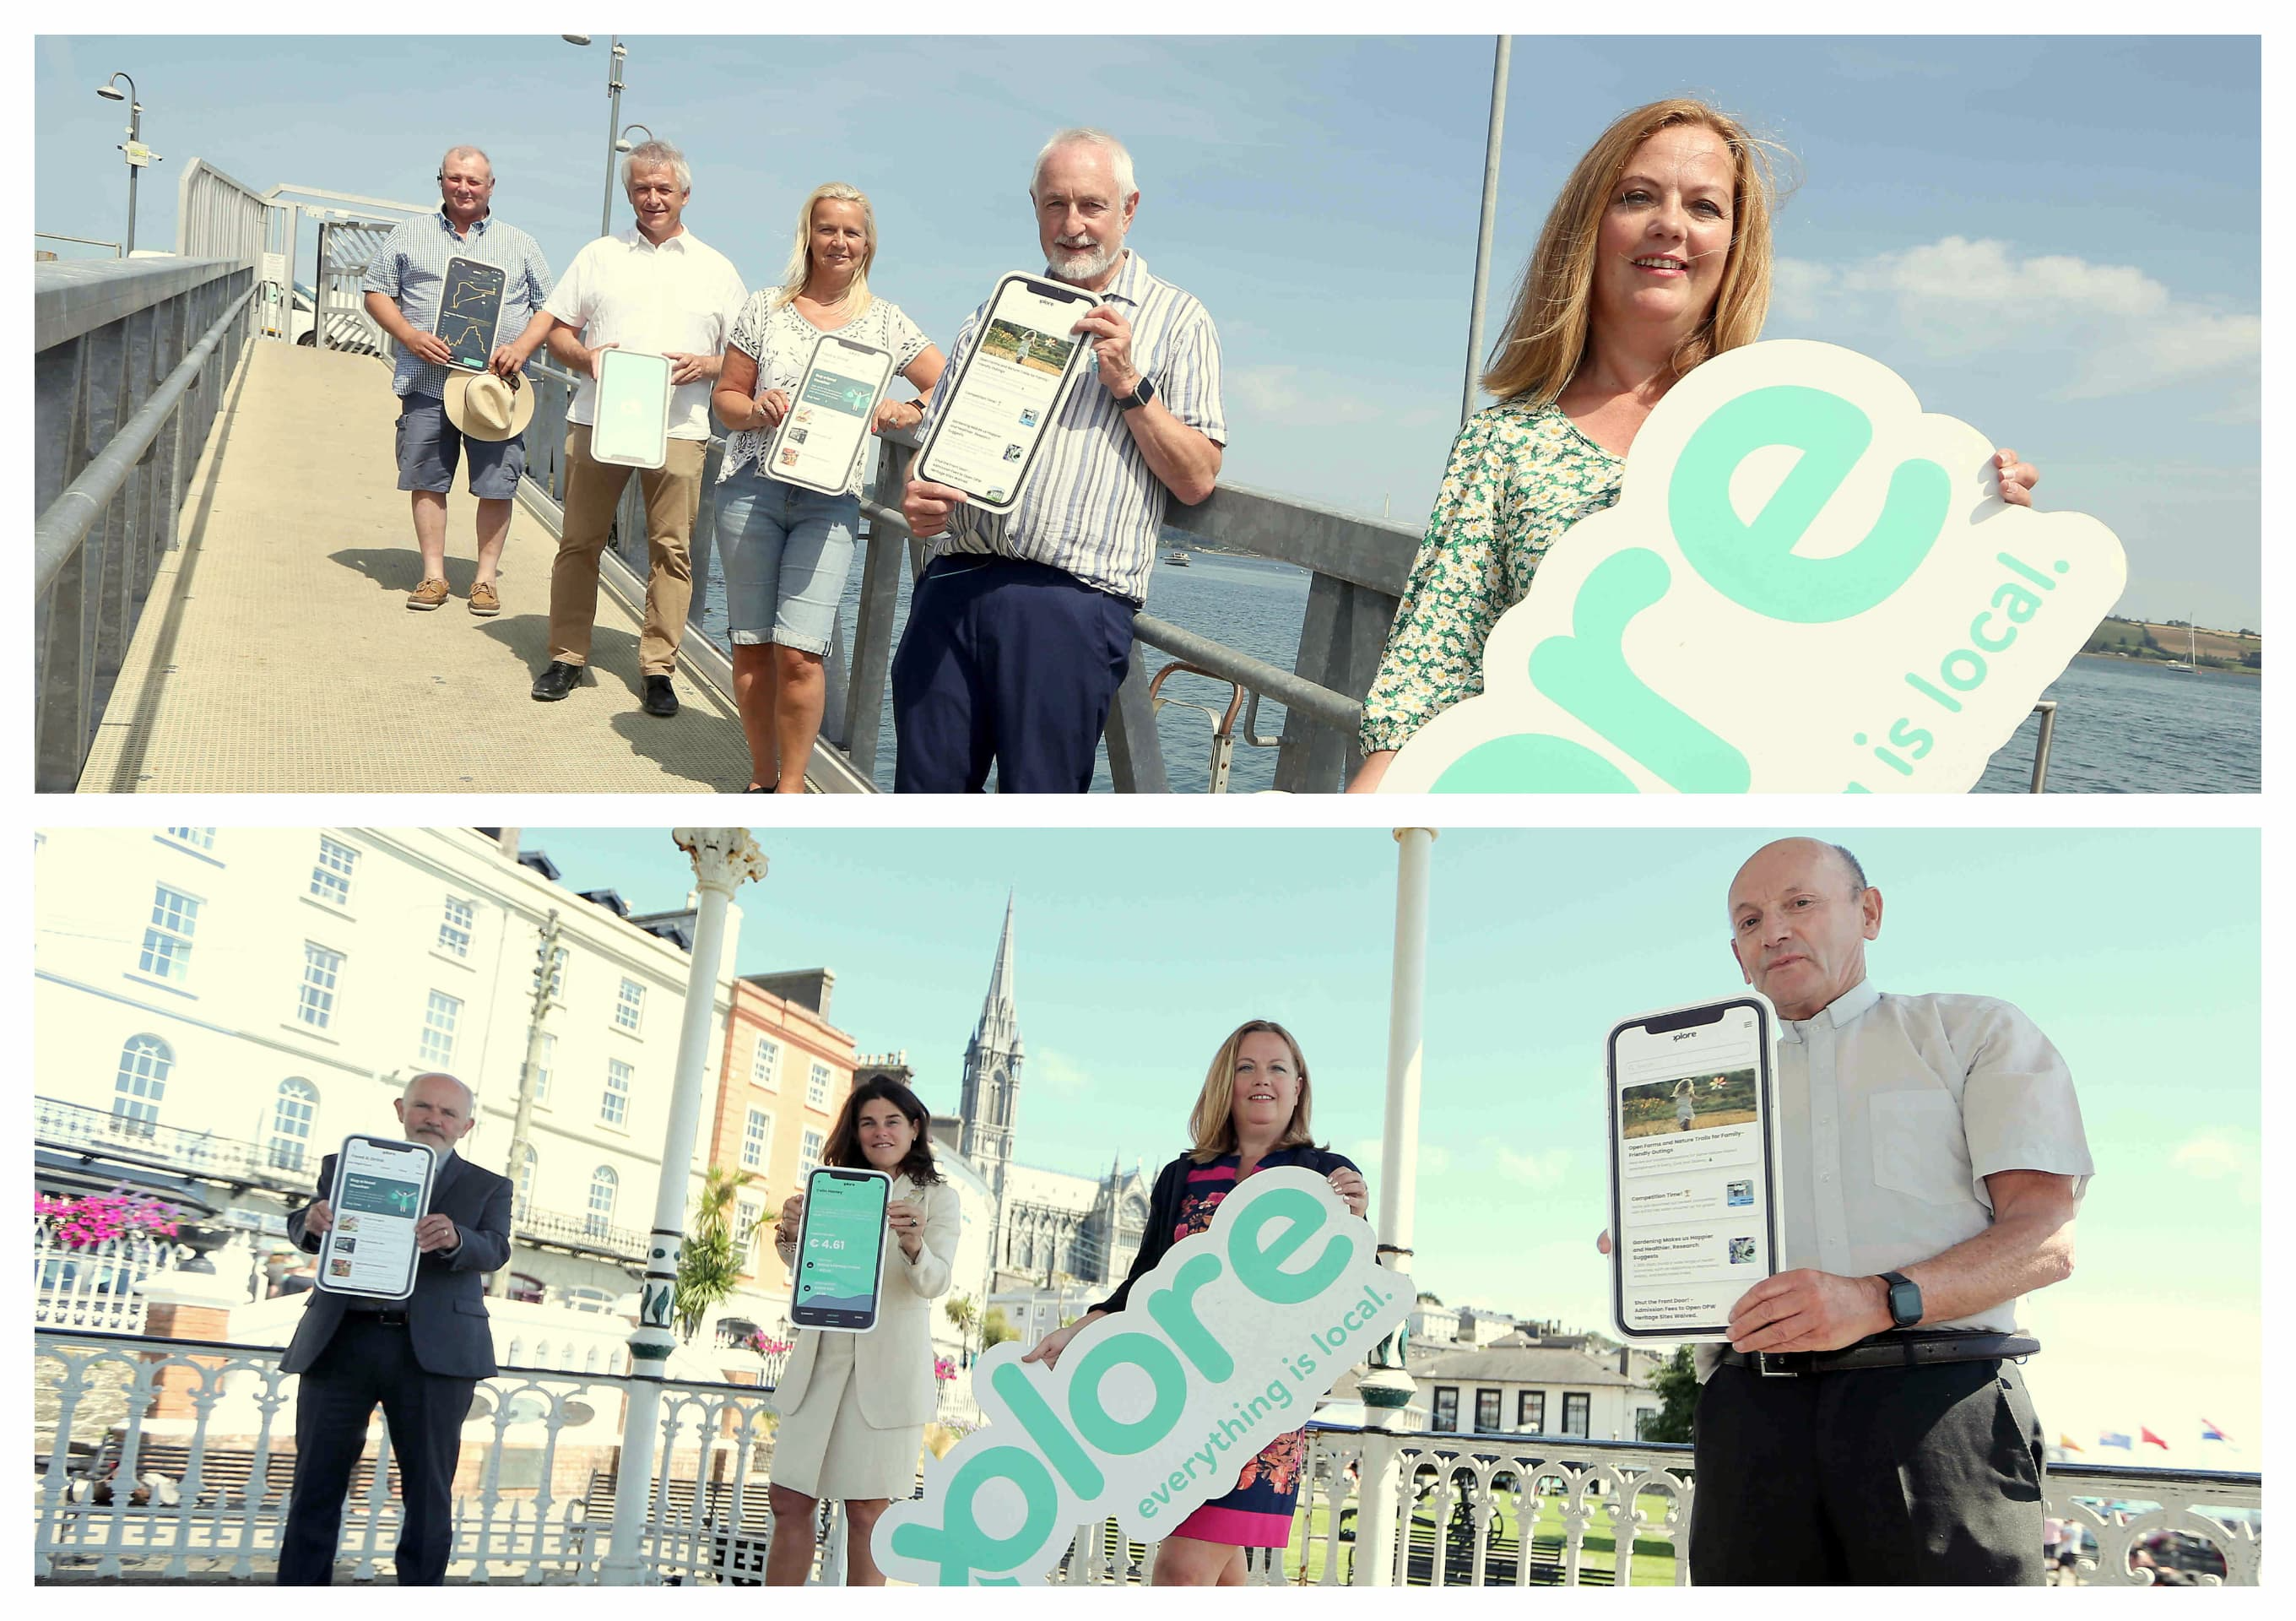 Cobh and Youghal latest to join the Xplore digital platform